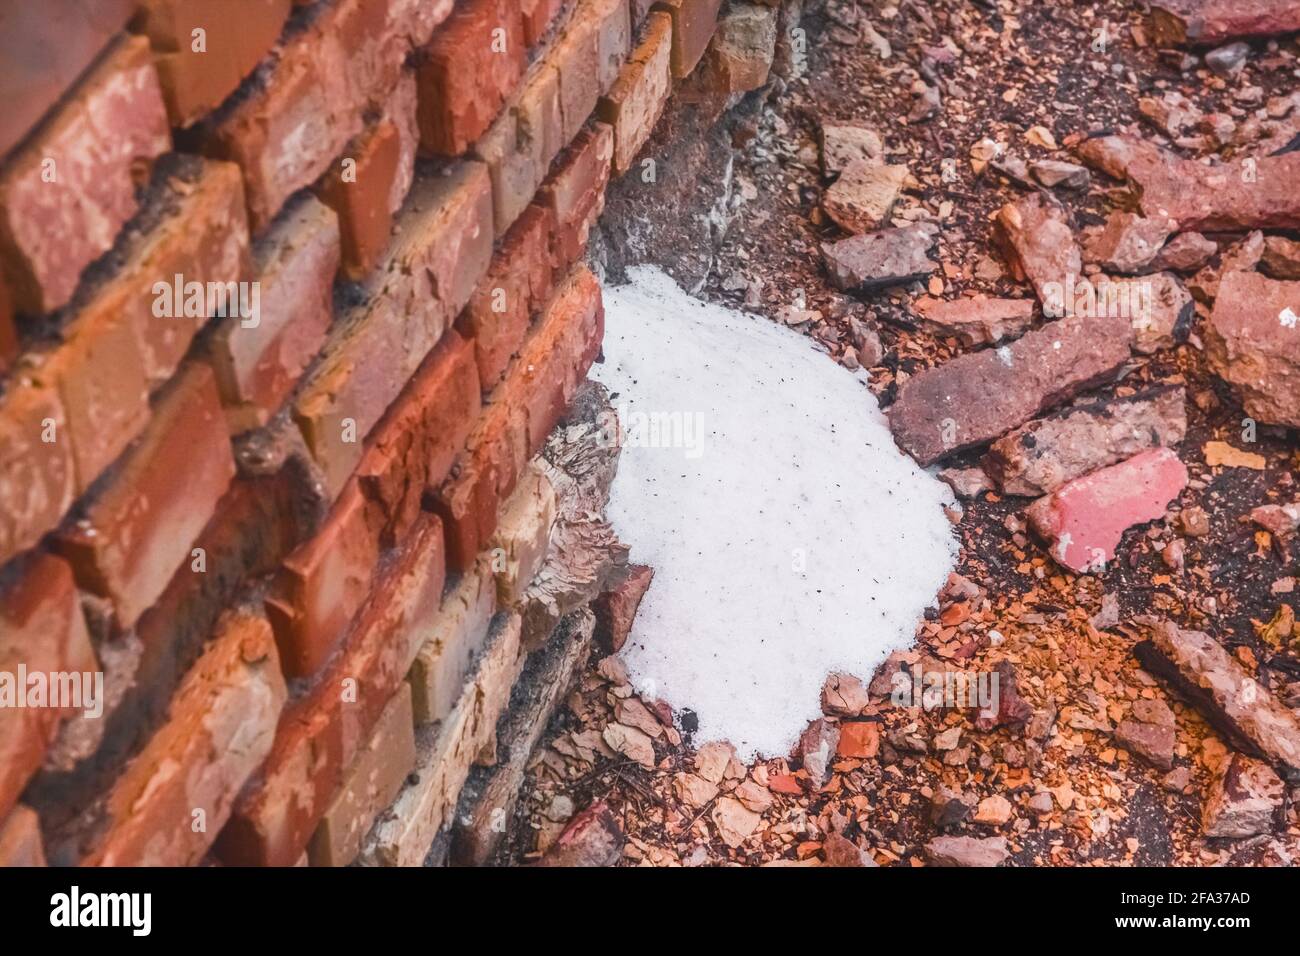 White ammonia saltpeter, fertilizer woke up through the destroyed old brick wall of the industrial warehouse with fertilizer. Stock Photo